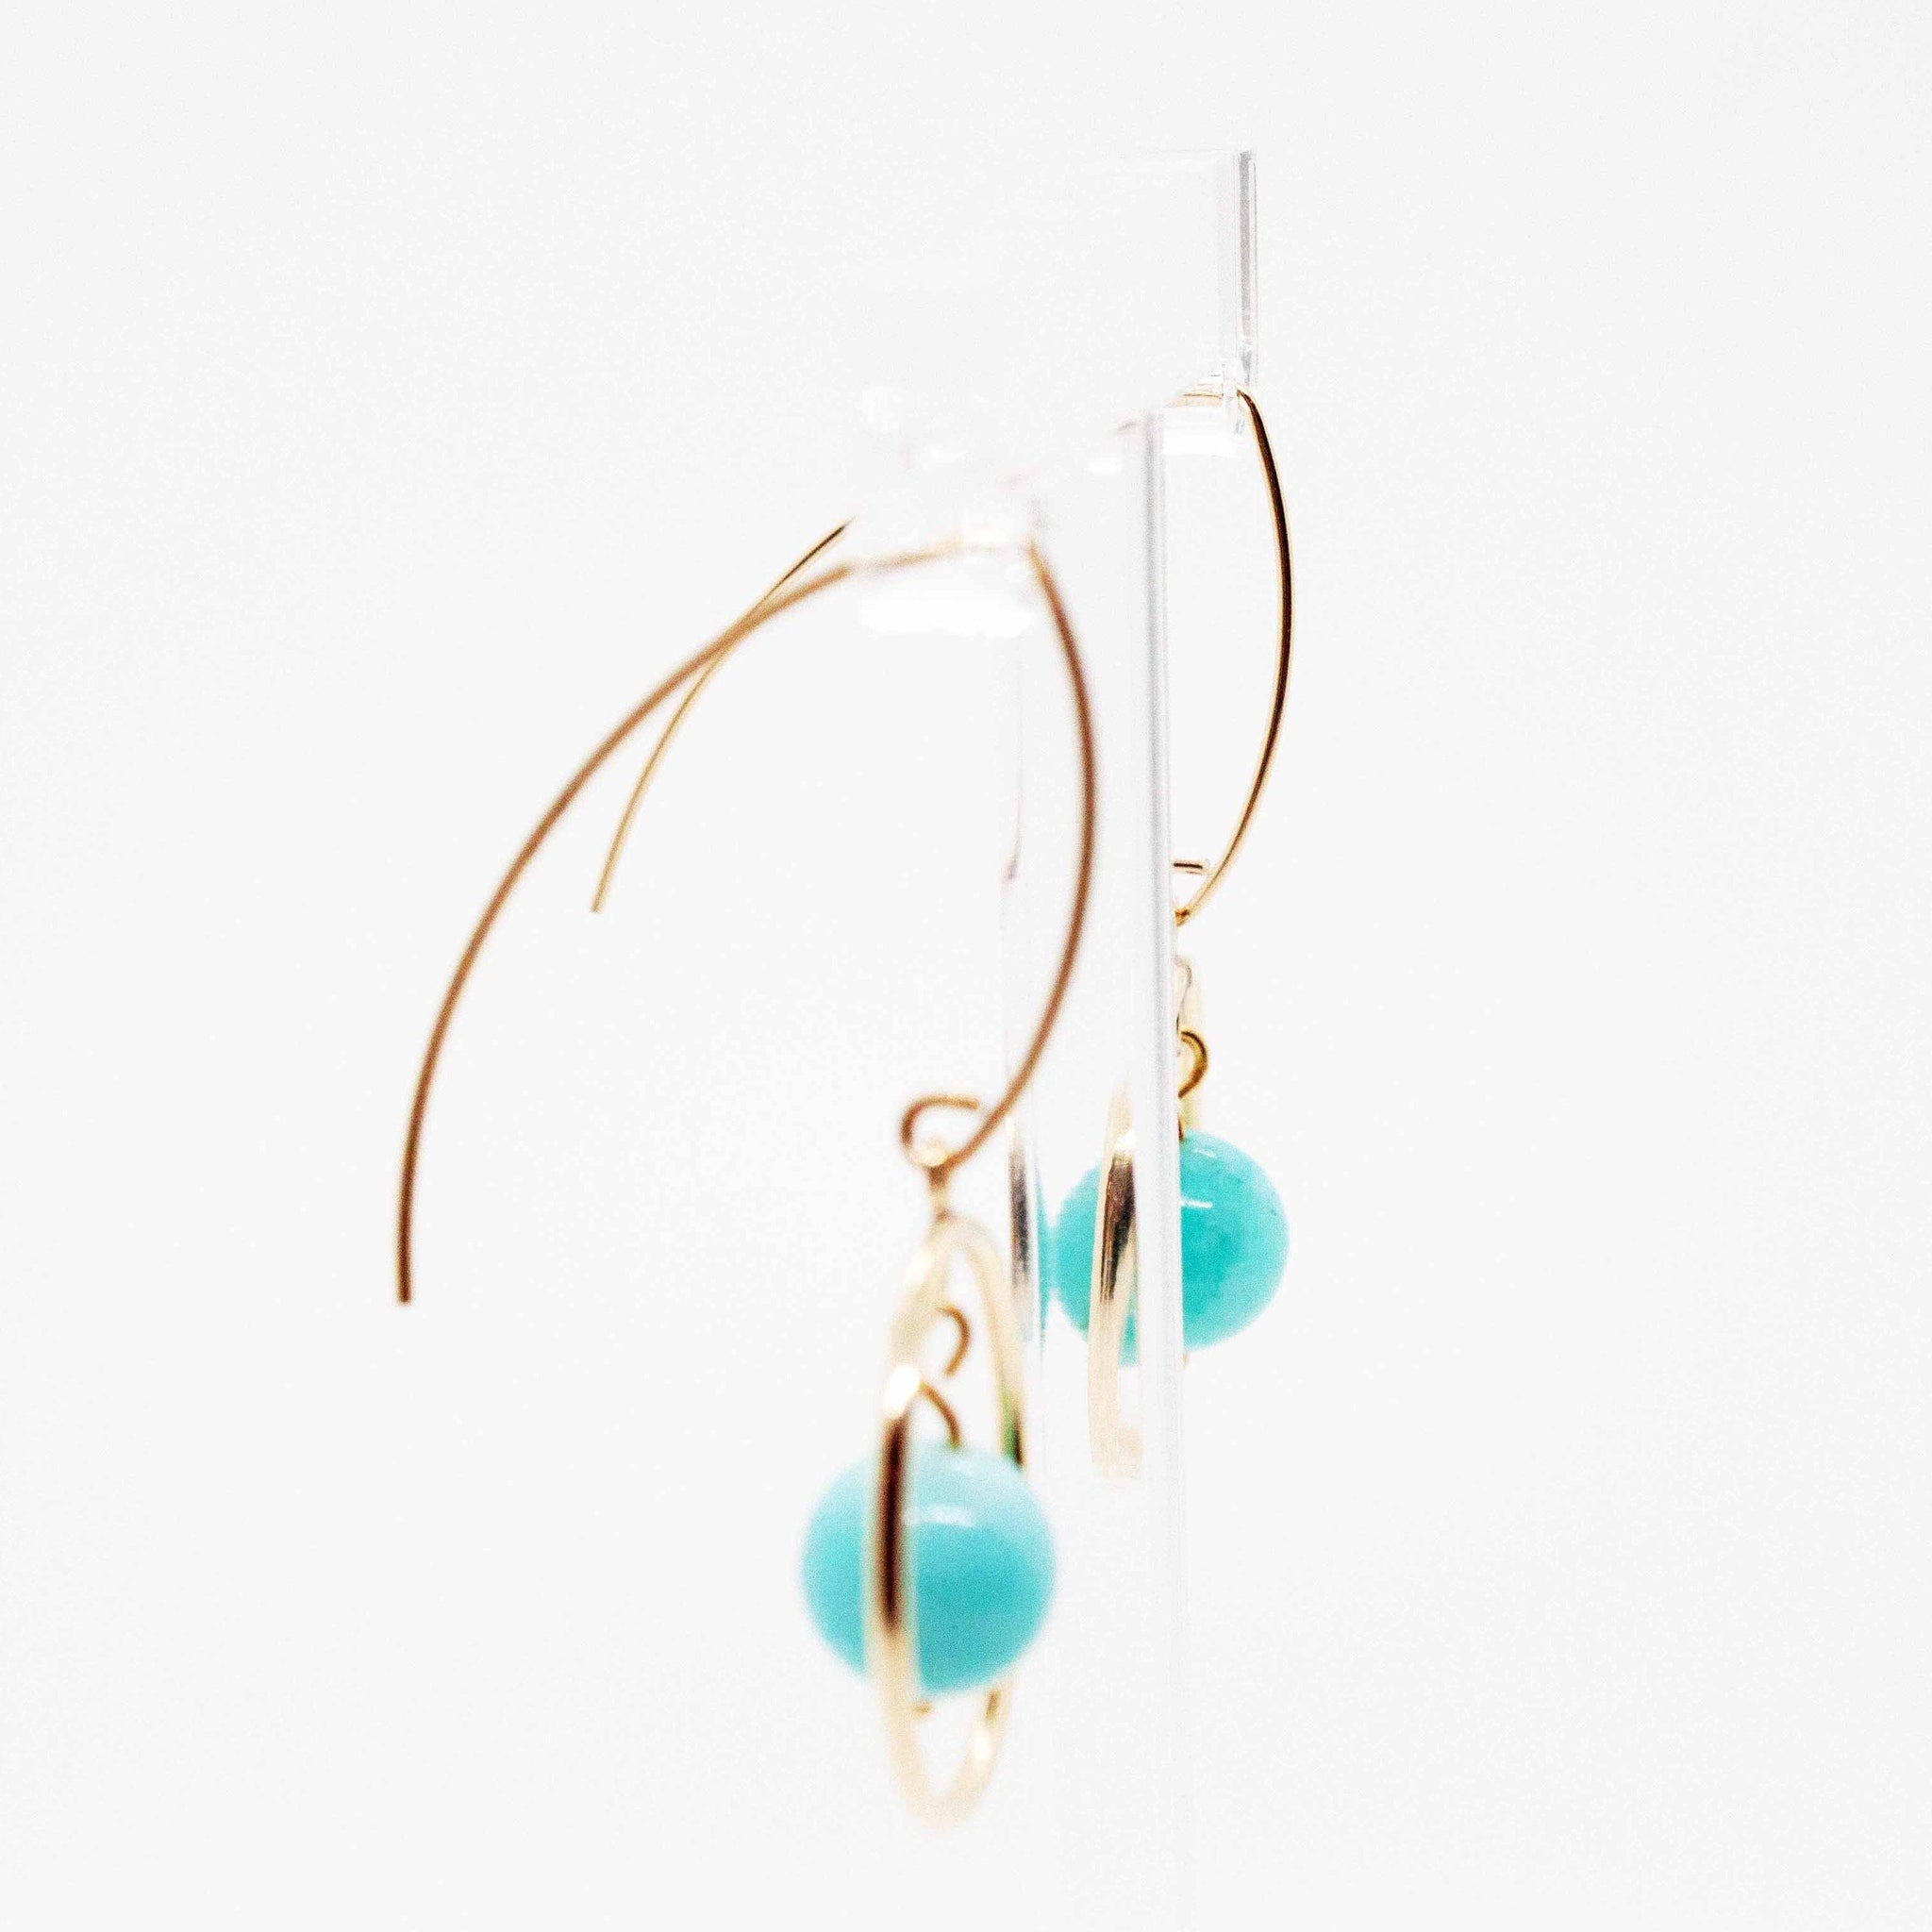 Gold and turquoise ... has there ever been a better colour combination? Decorate your earlobes with this lovely, summery ear candy! 1.5" earrings made with amazonite beads on 14kt gold-filled hoops & earring hooks hypo-allergenic and sensitive ear friendly. Handmade in Toronto kp jewelry co.